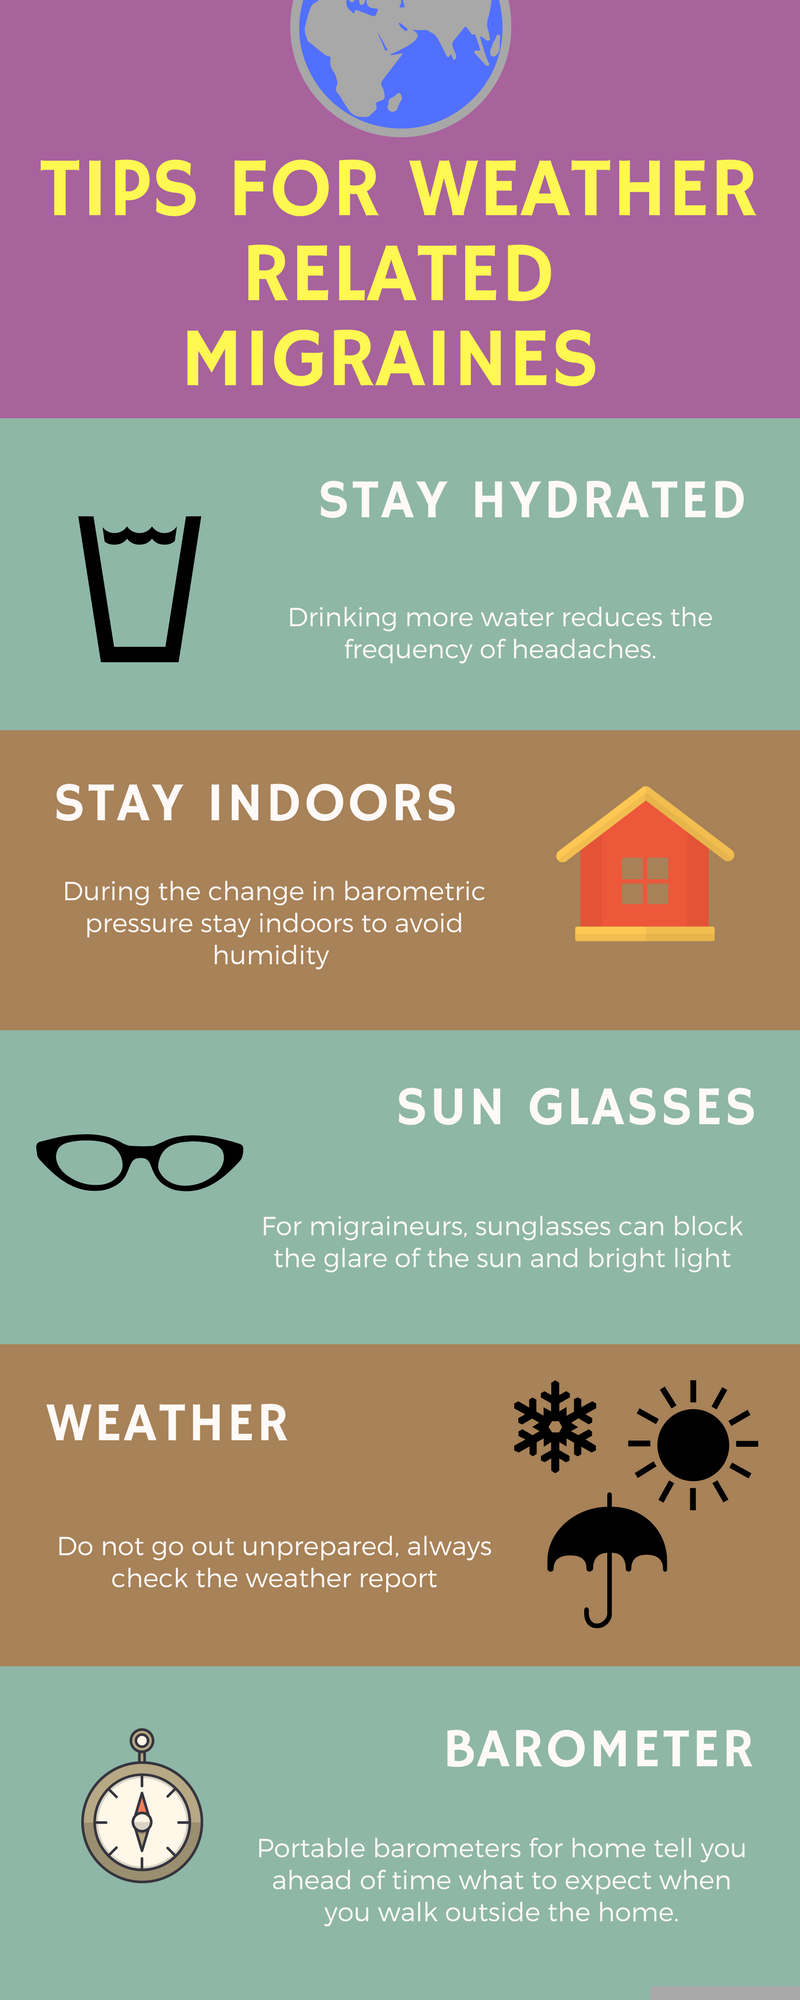 Tips for weather related migraines